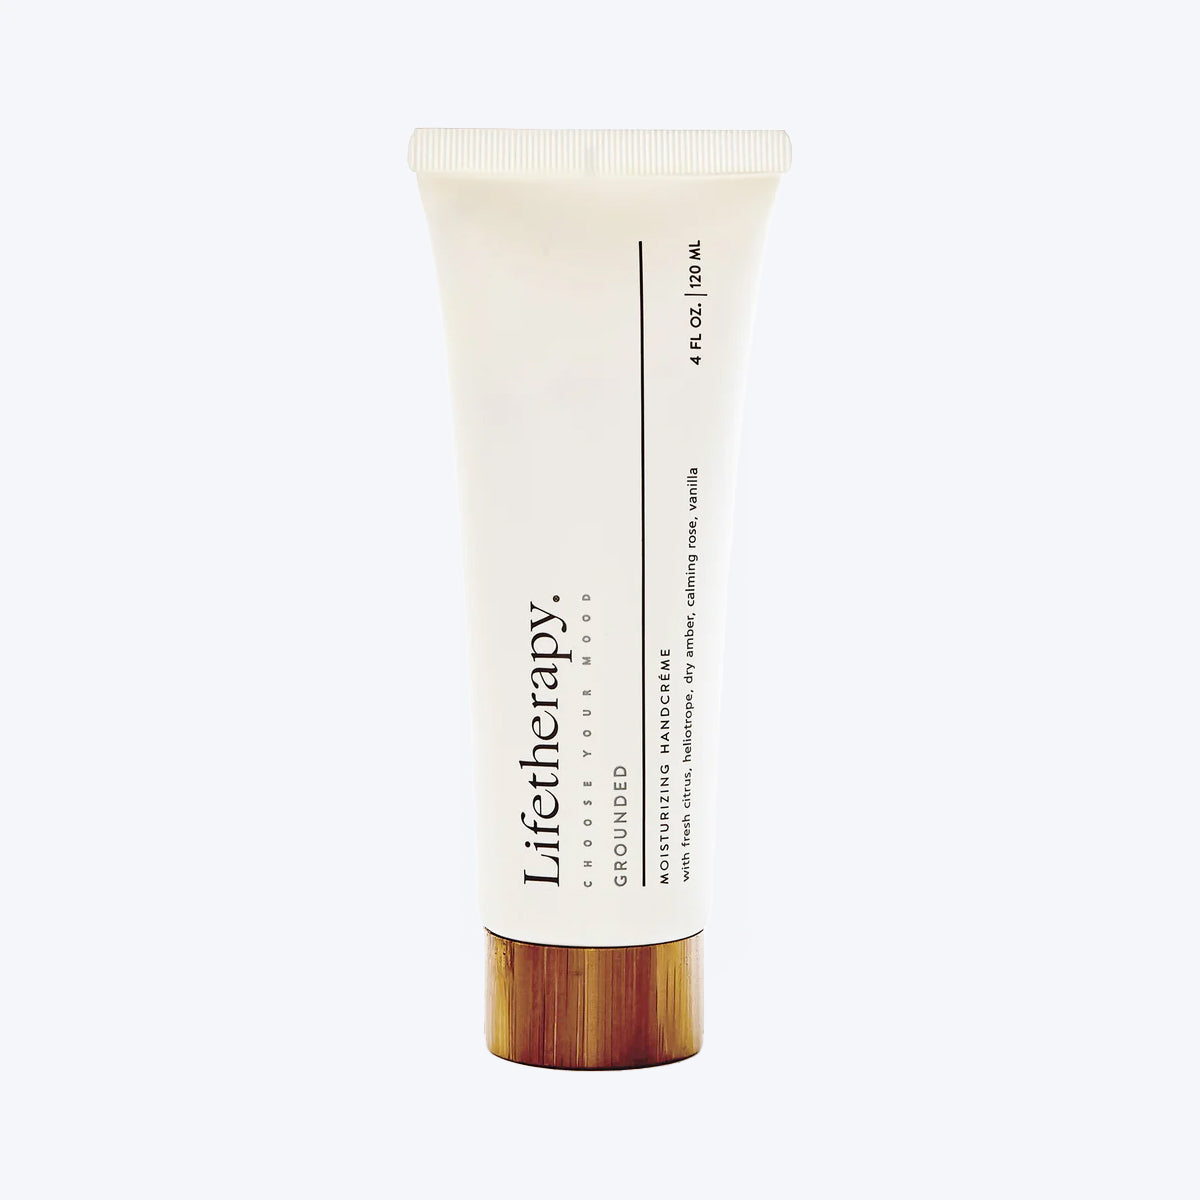 Grounded hand cream by Lifetherapy